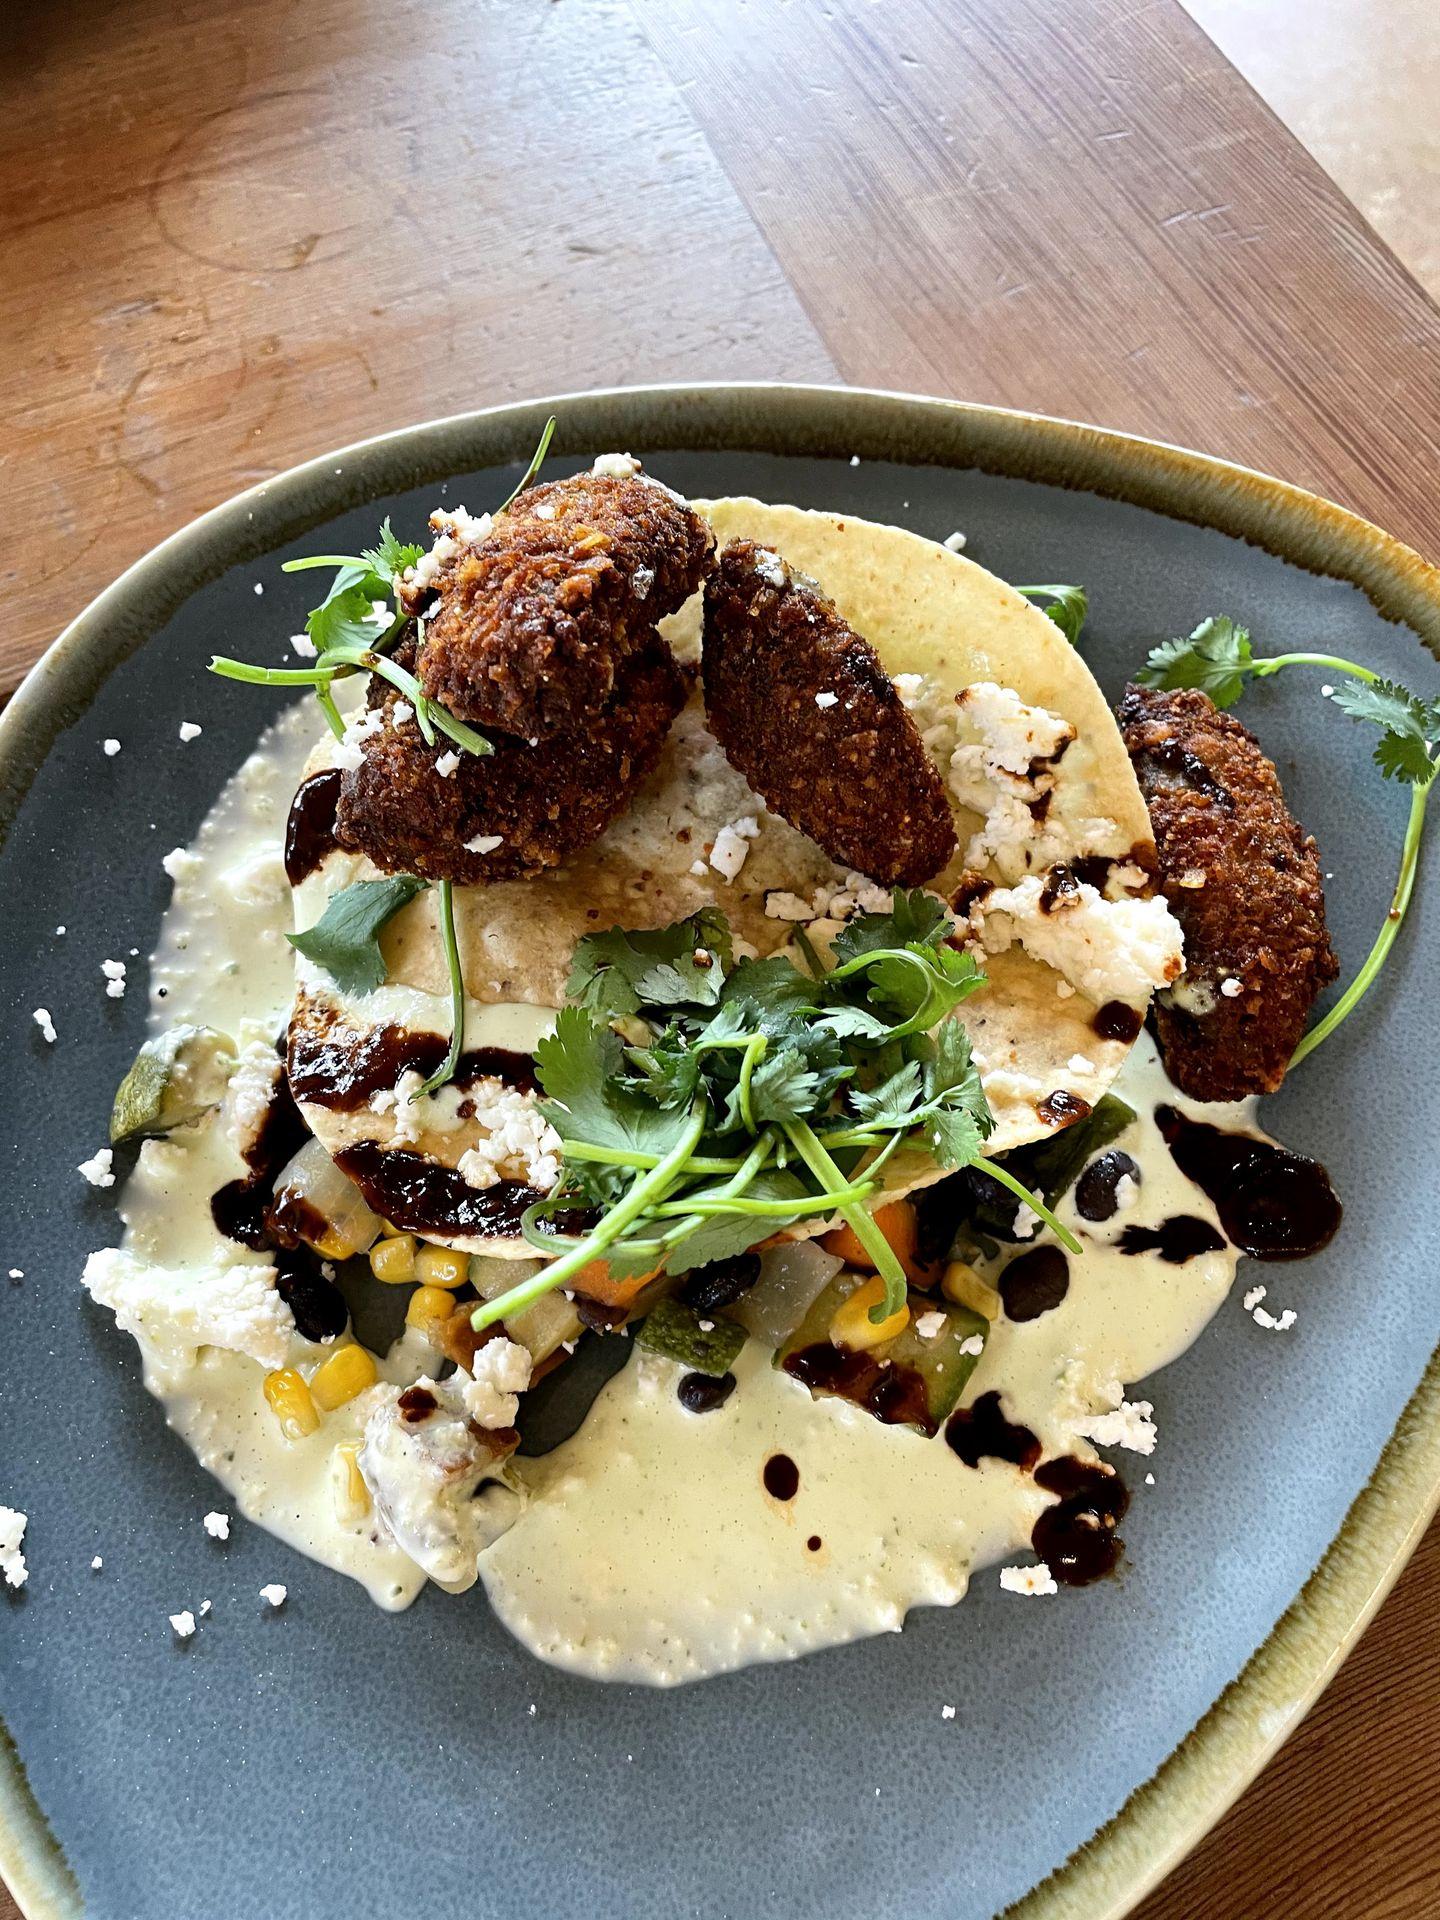 A plate with fried avocado, a sauce, corn, cheese and garnish from The Leaning Pear.